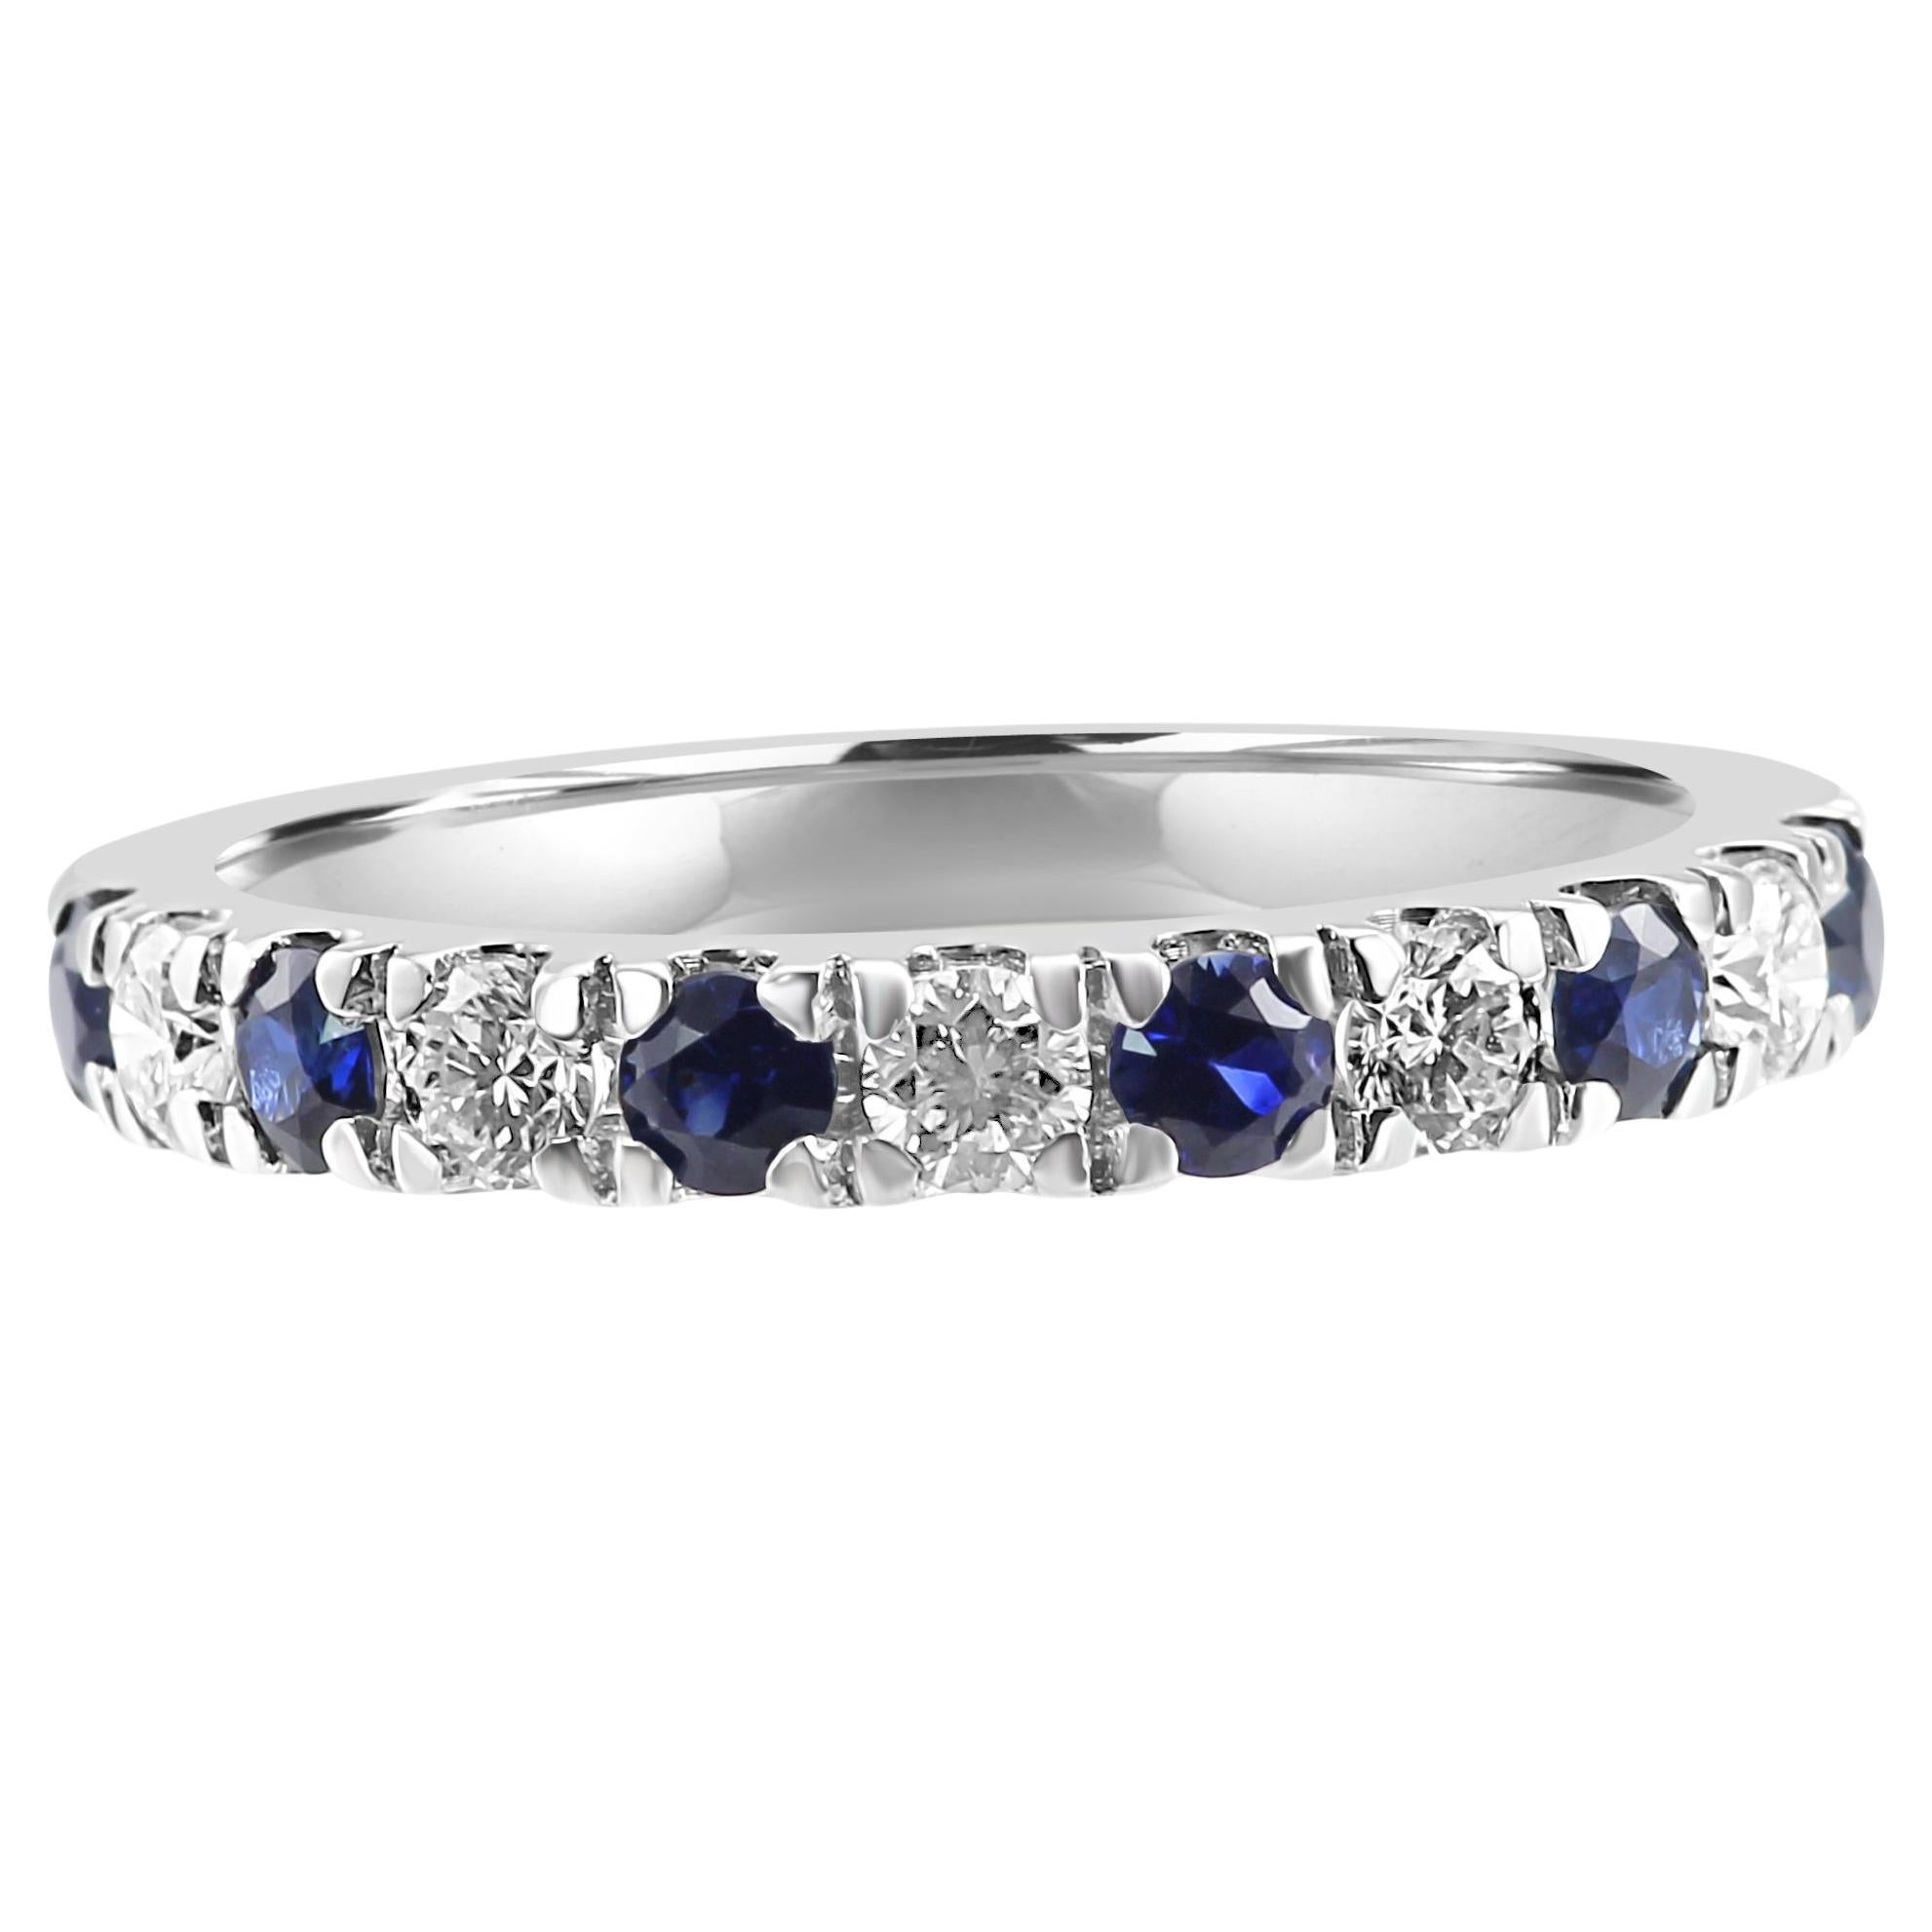 For Sale:  Blue Sapphire White Diamond Round 18K White Gold Fashion Engagement Band Ring